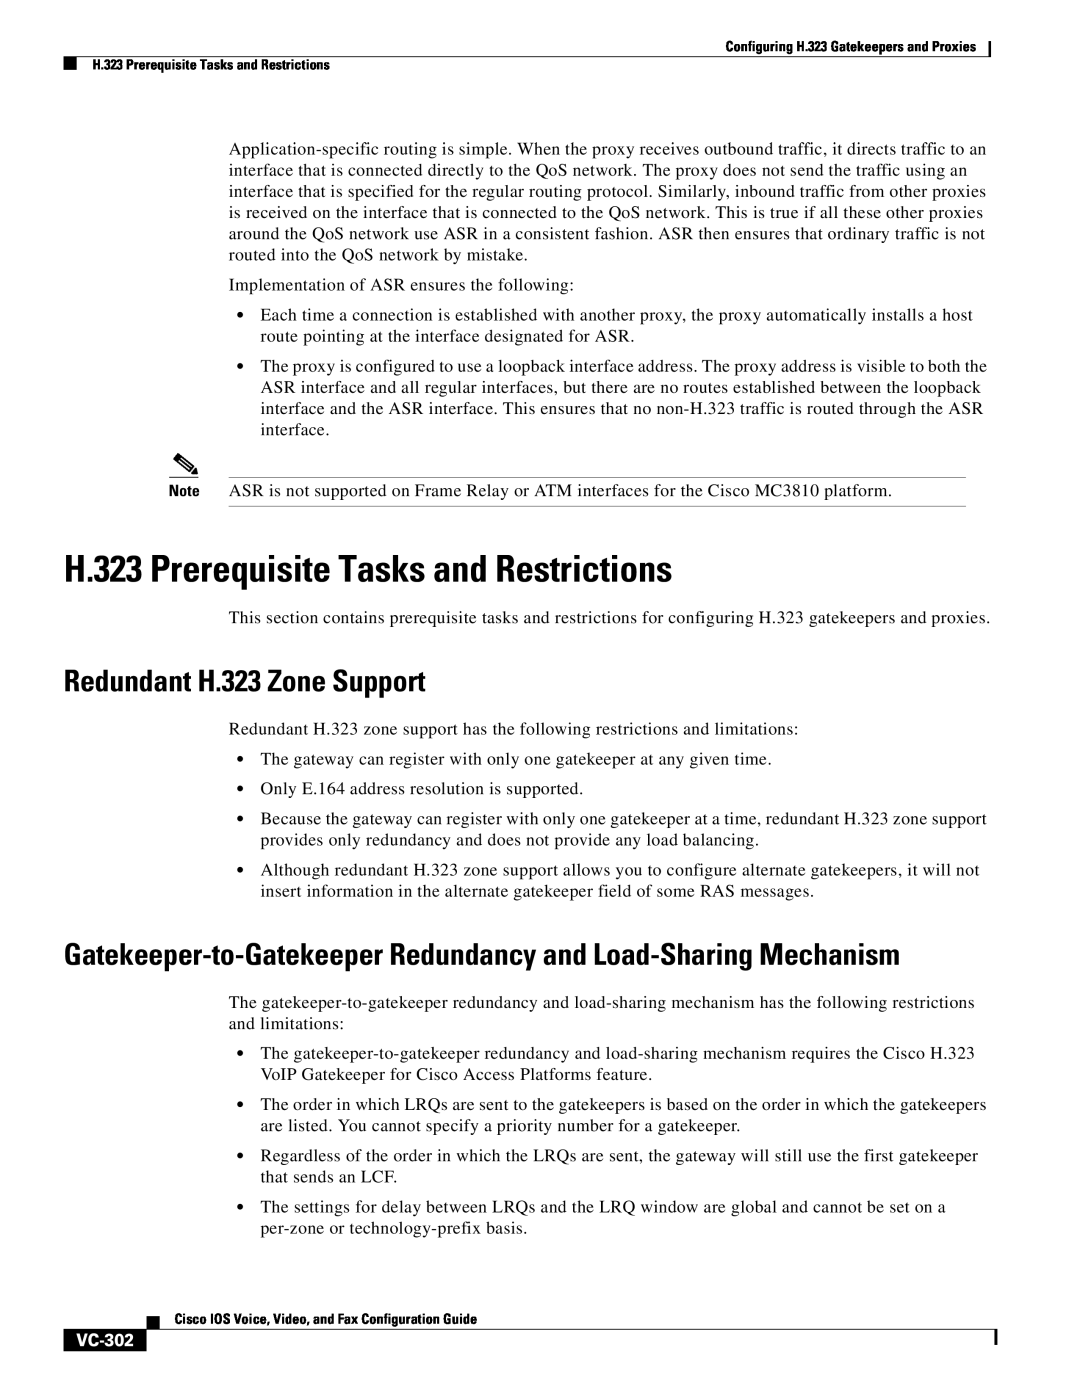 Cisco Systems VC-289 manual H.323 Prerequisite Tasks and Restrictions, Redundant H.323 Zone Support, VC-302 